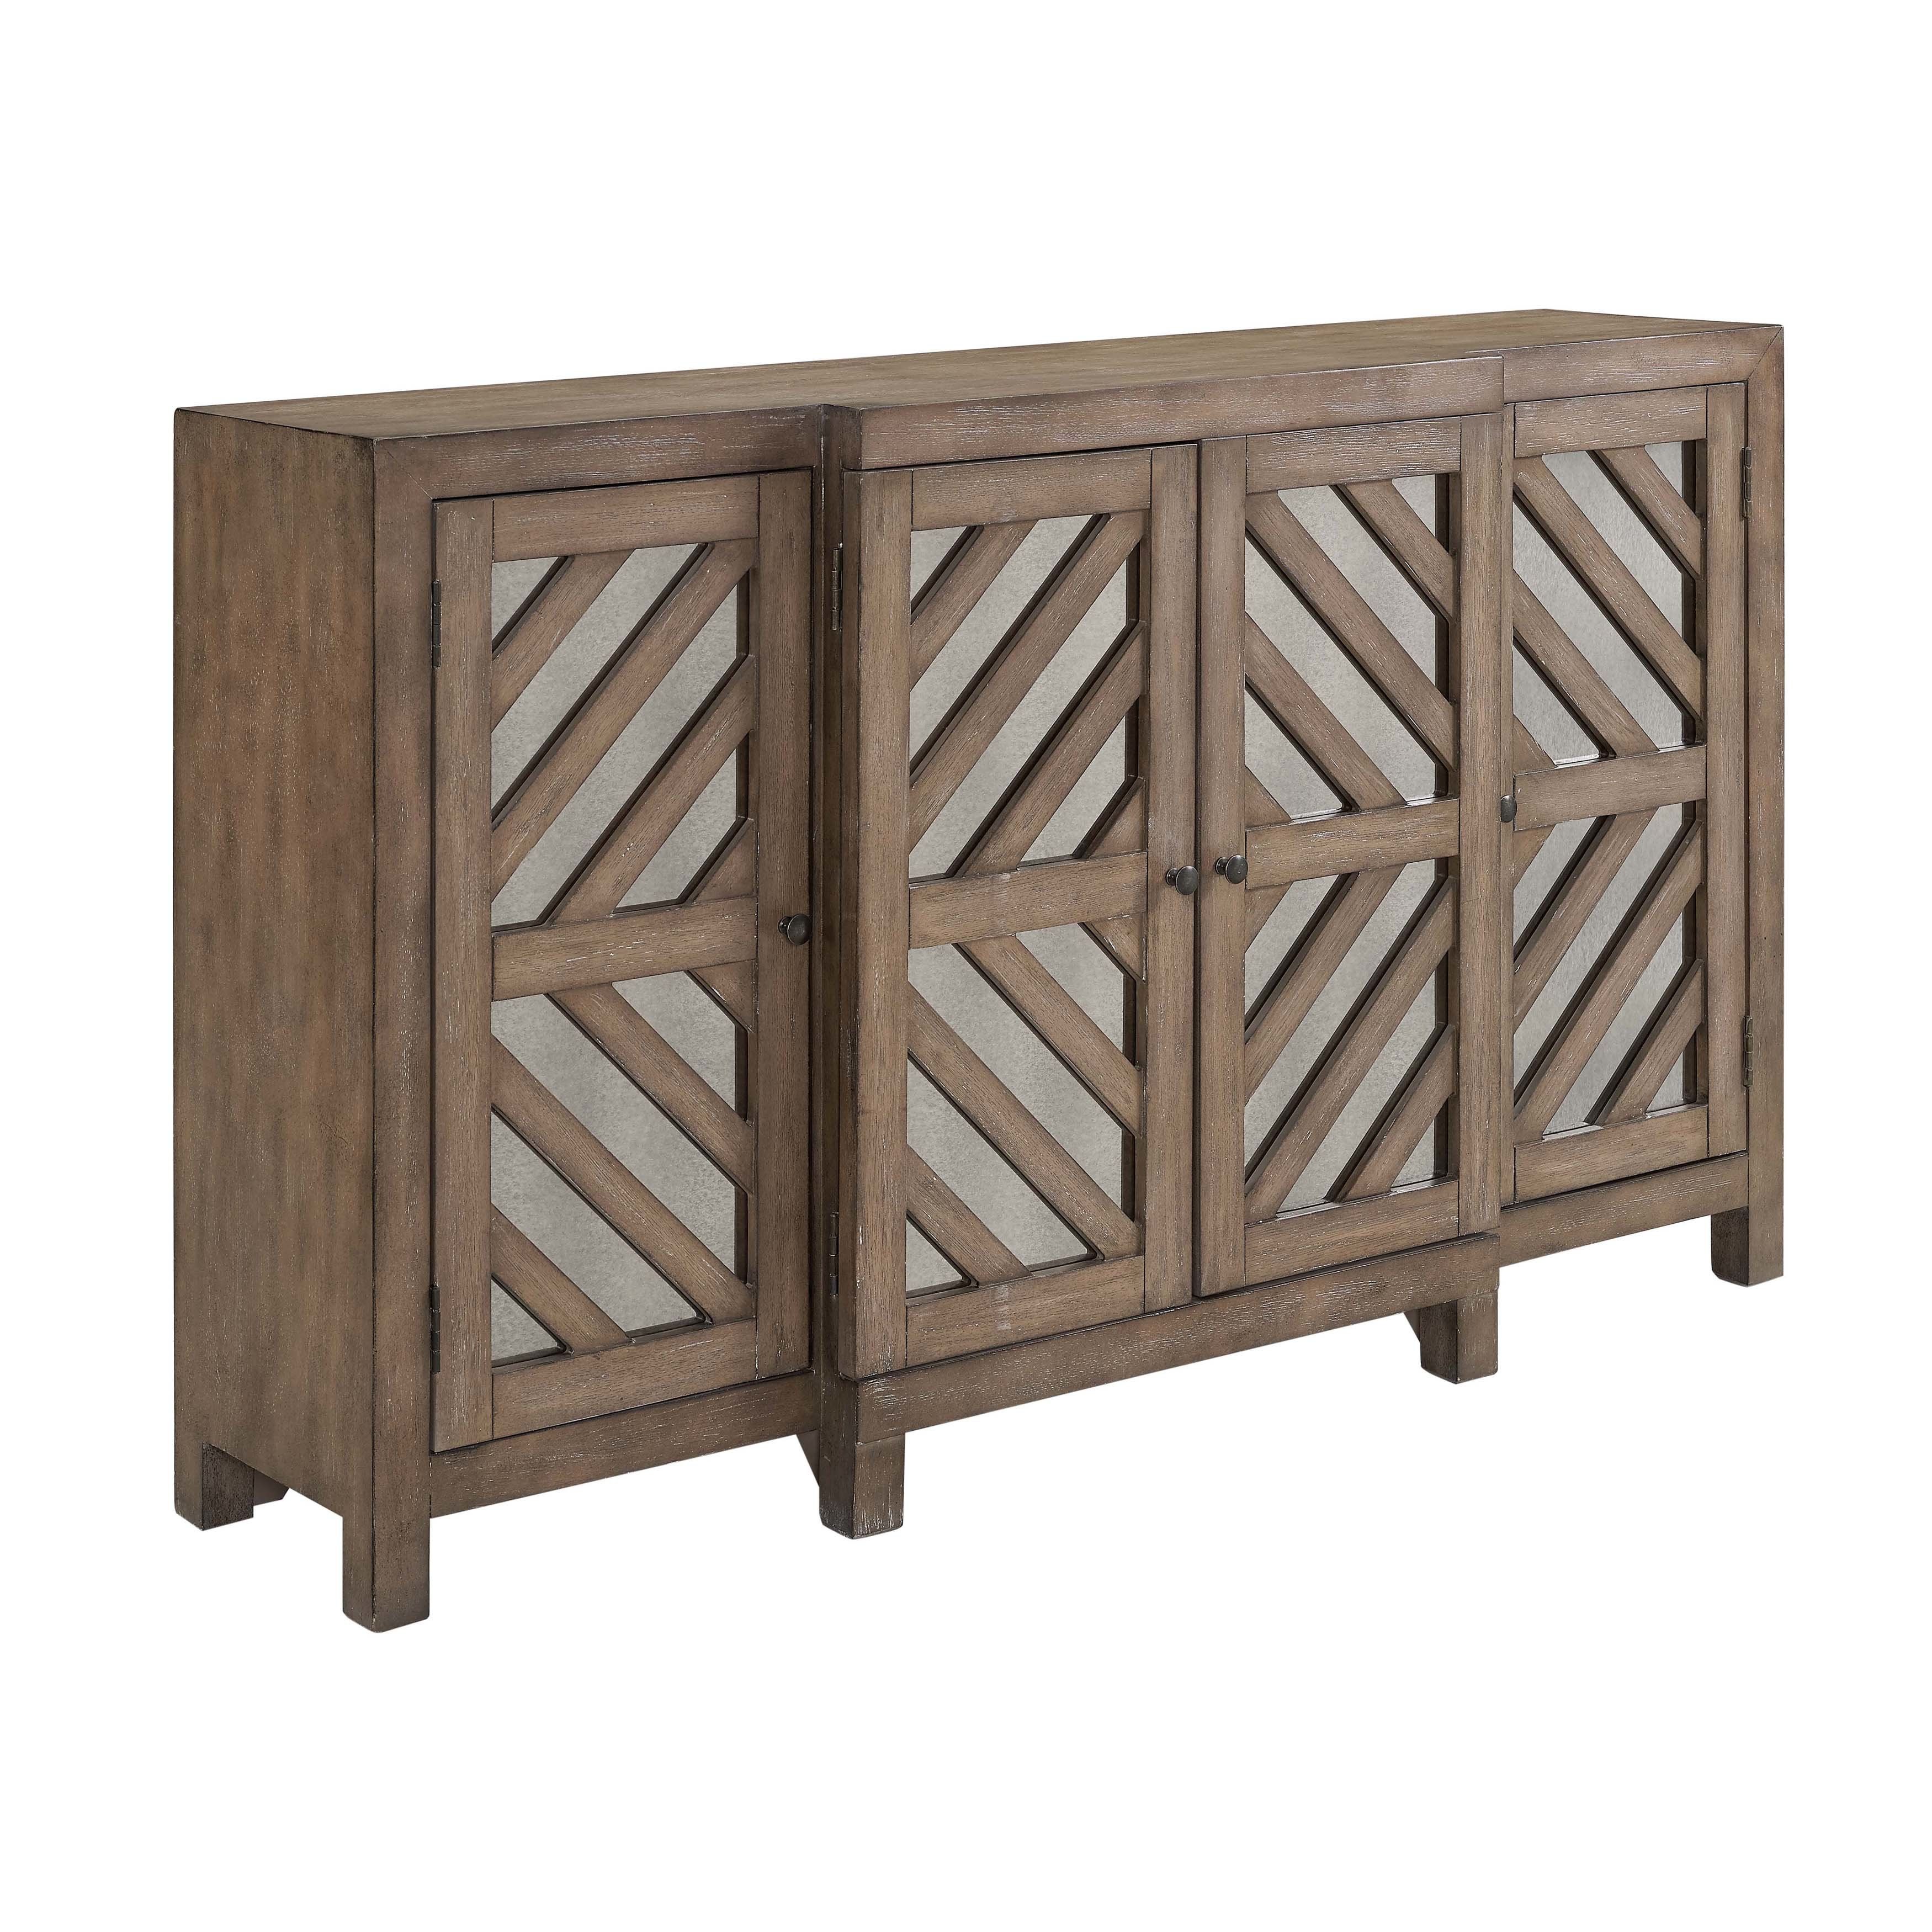 Farmhouse & Rustic Sideboards & Buffets | Birch Lane For Medium Cherry Buffets With Wood Top (View 18 of 30)